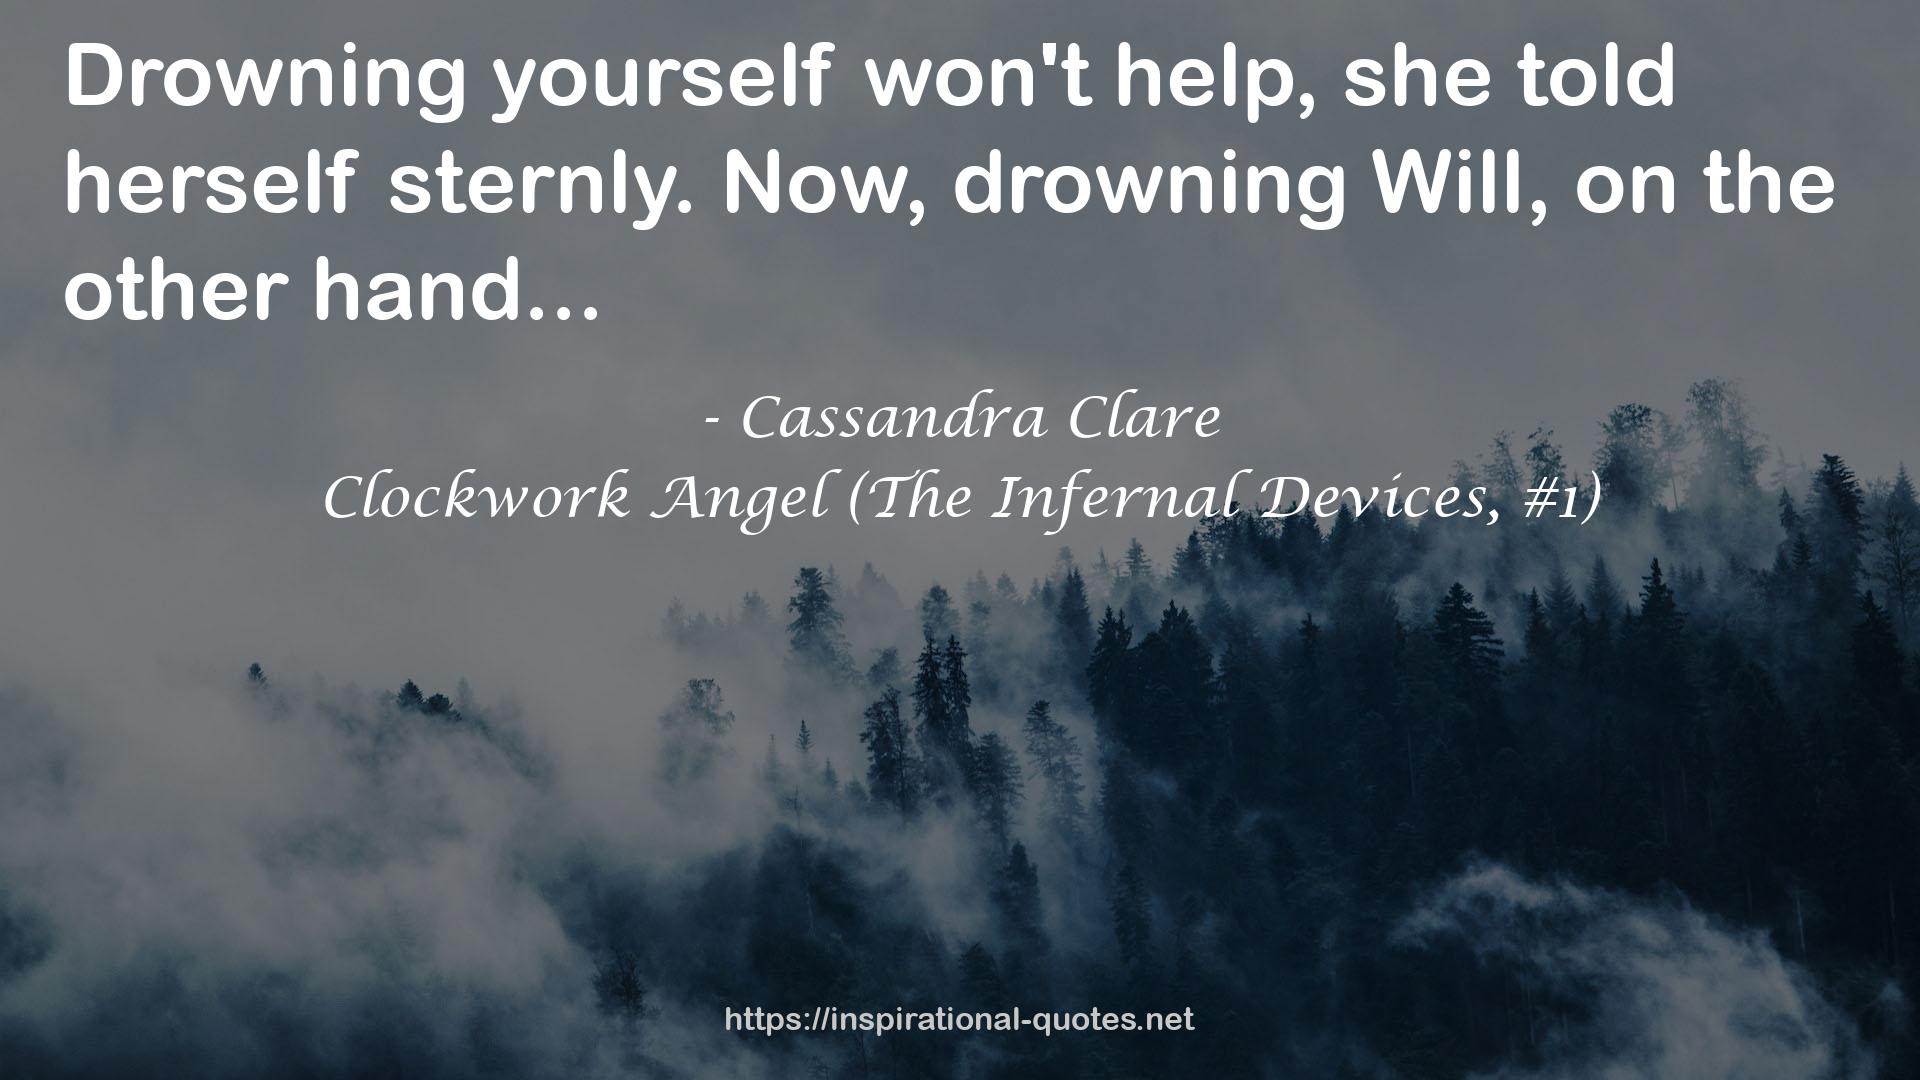 Clockwork Angel (The Infernal Devices, #1) QUOTES